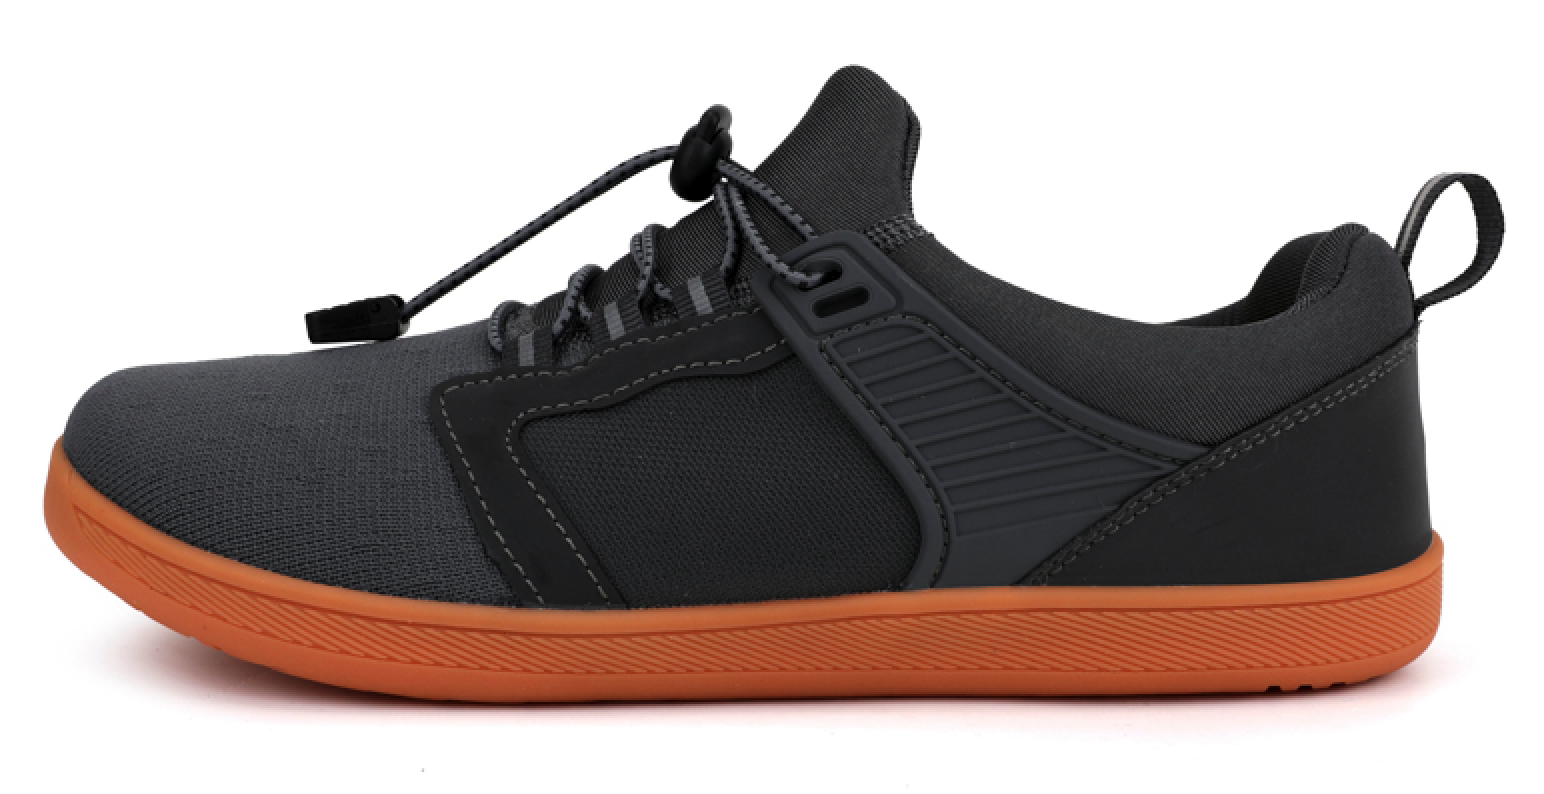 Explorer Contact Barefoot shoes black and orange color